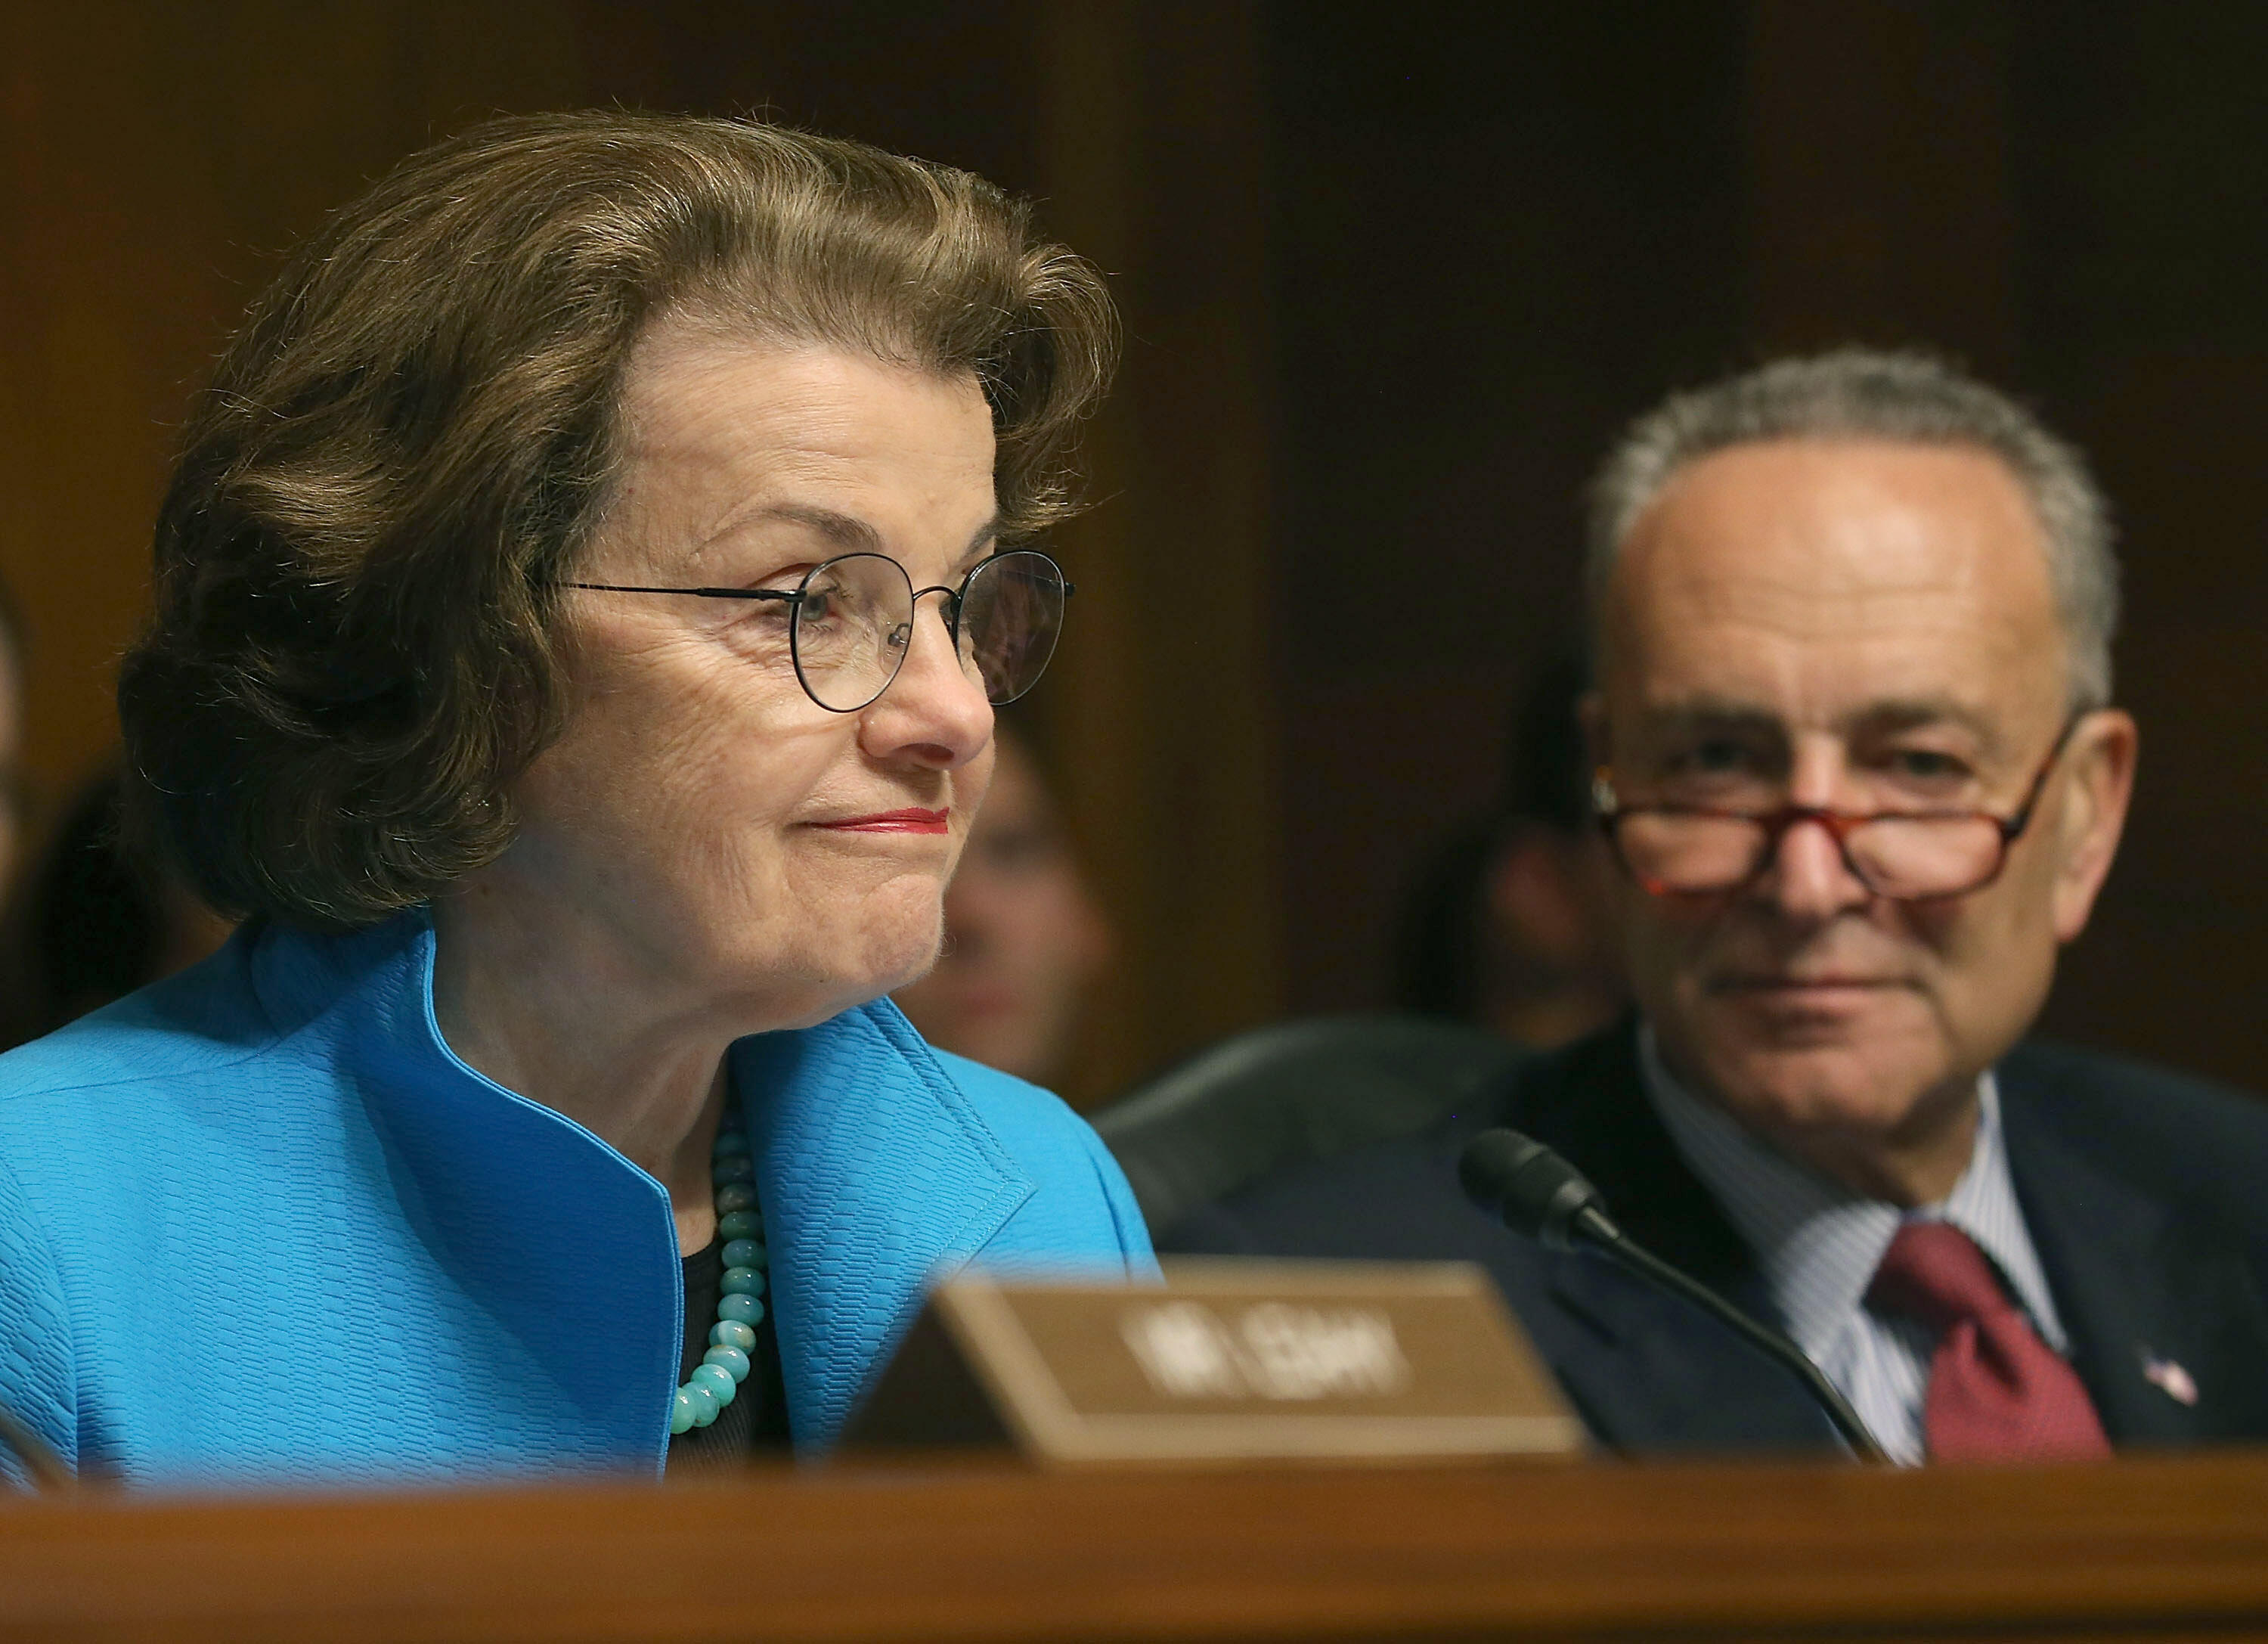 WASHINGTON, DC - JULY 08: Sen. Dianne Feinstein (D-CA) (L) and Sen. Chuck Schumer (D-NY) participate in a Senate Judiciary Committee hearing on Capitol Hill, July 8, 2015 in Washington, DC. The committee was hearing testimony on encryption technology, and